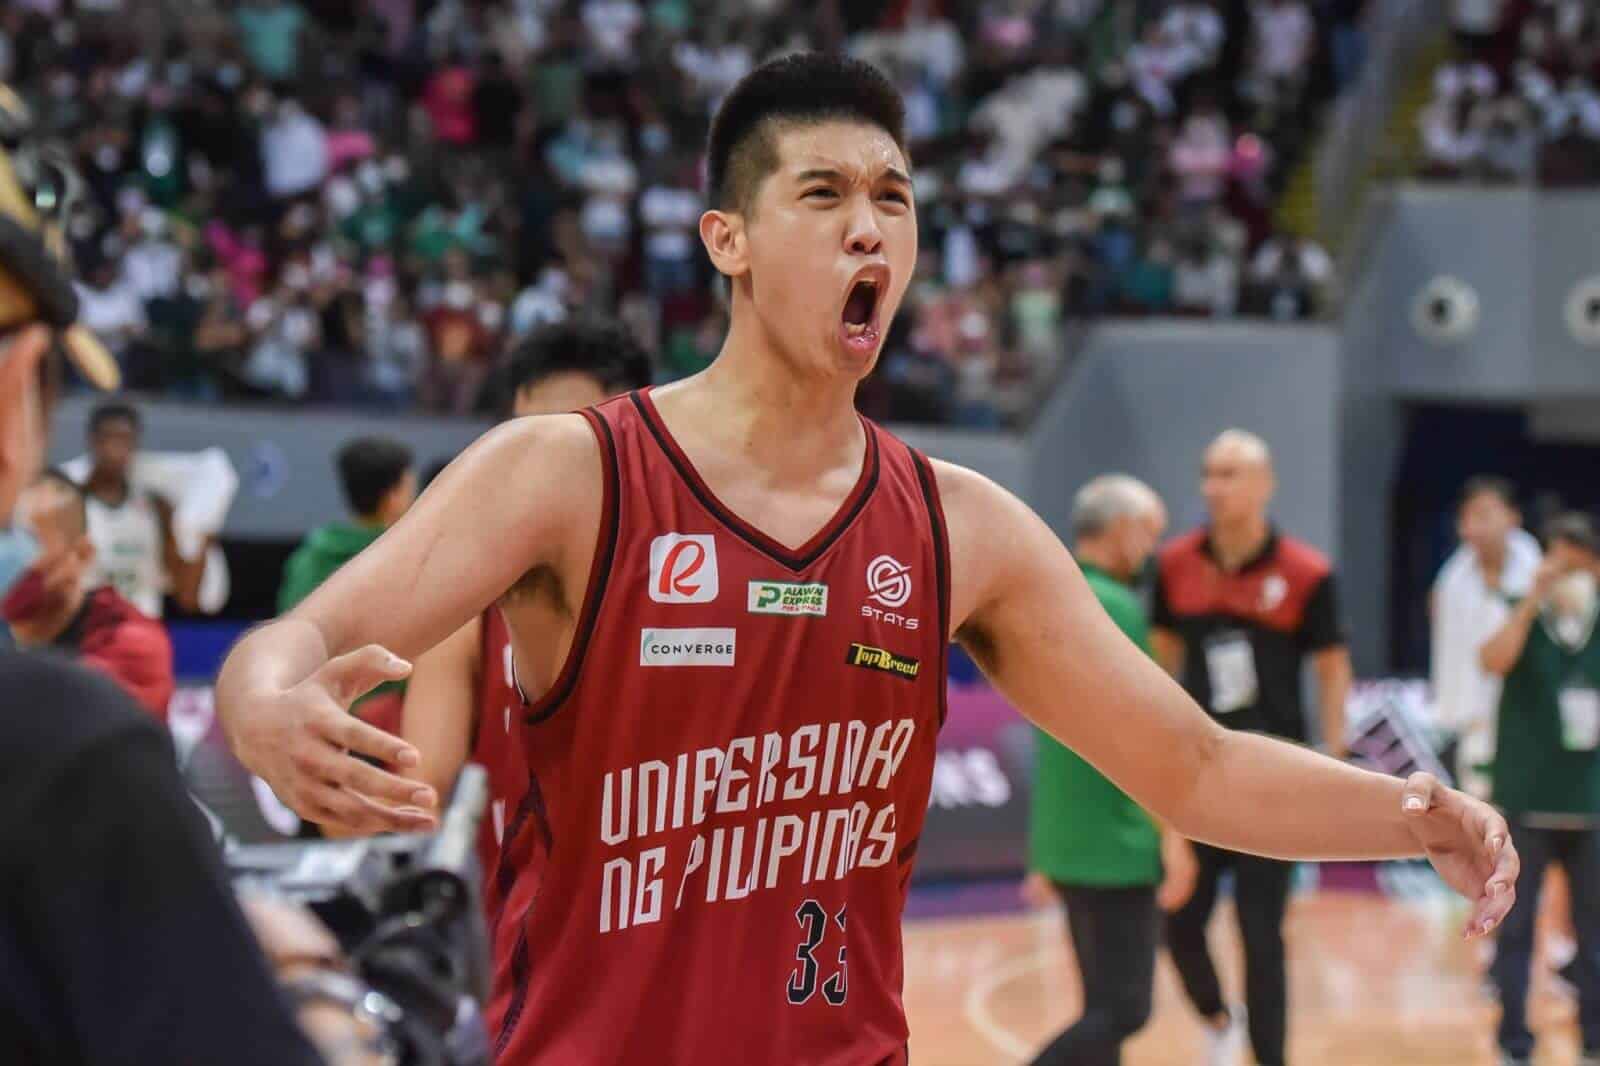 A basketball player from University of the Philippines celebrates on the court after beating La Salle and securing a UAAP finals ticket.